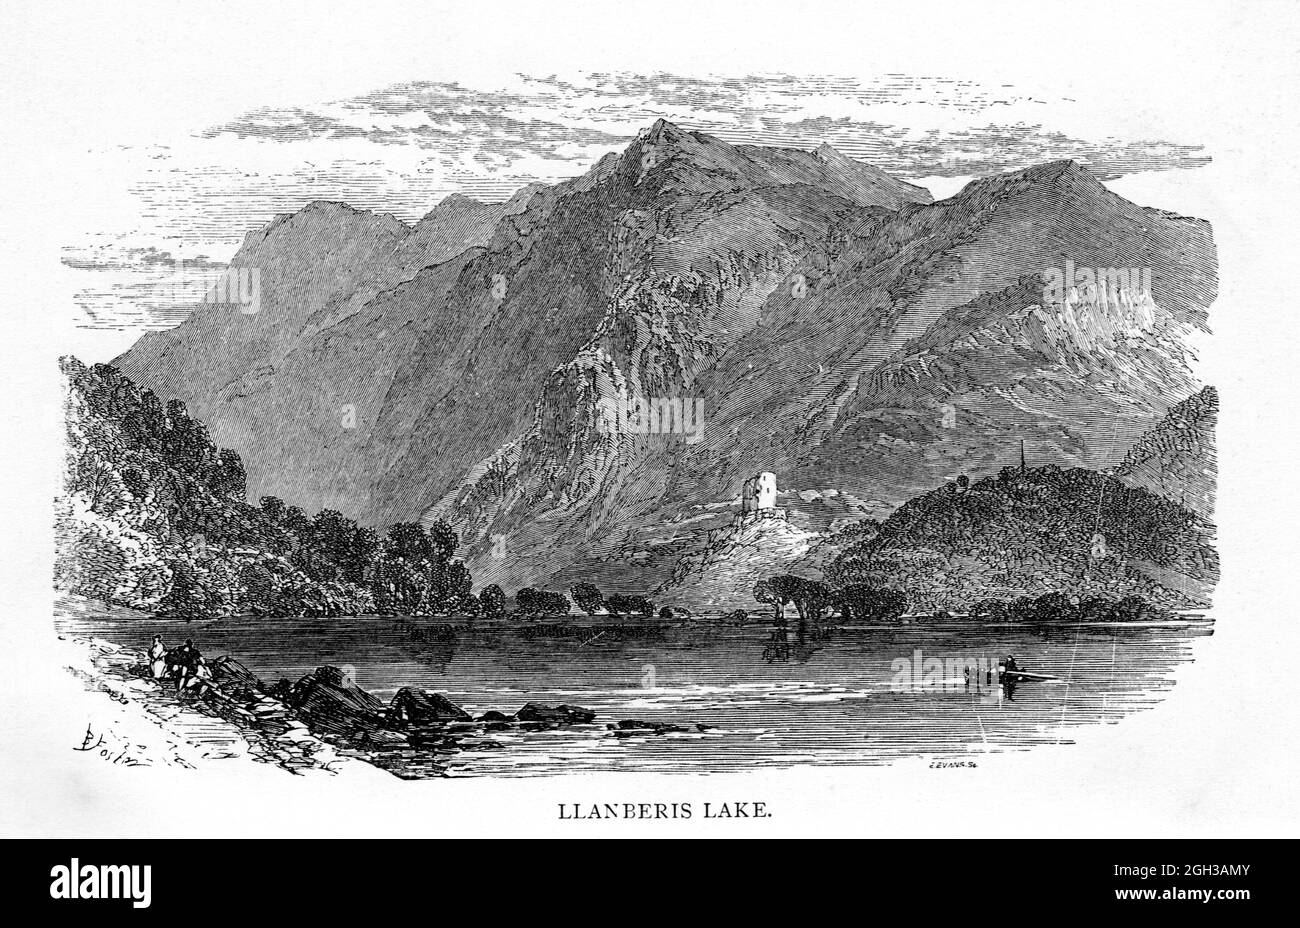 An illustration of Llanberis lake, taken from Black's Picturesque Guide to North Wales published 1886 Stock Photo